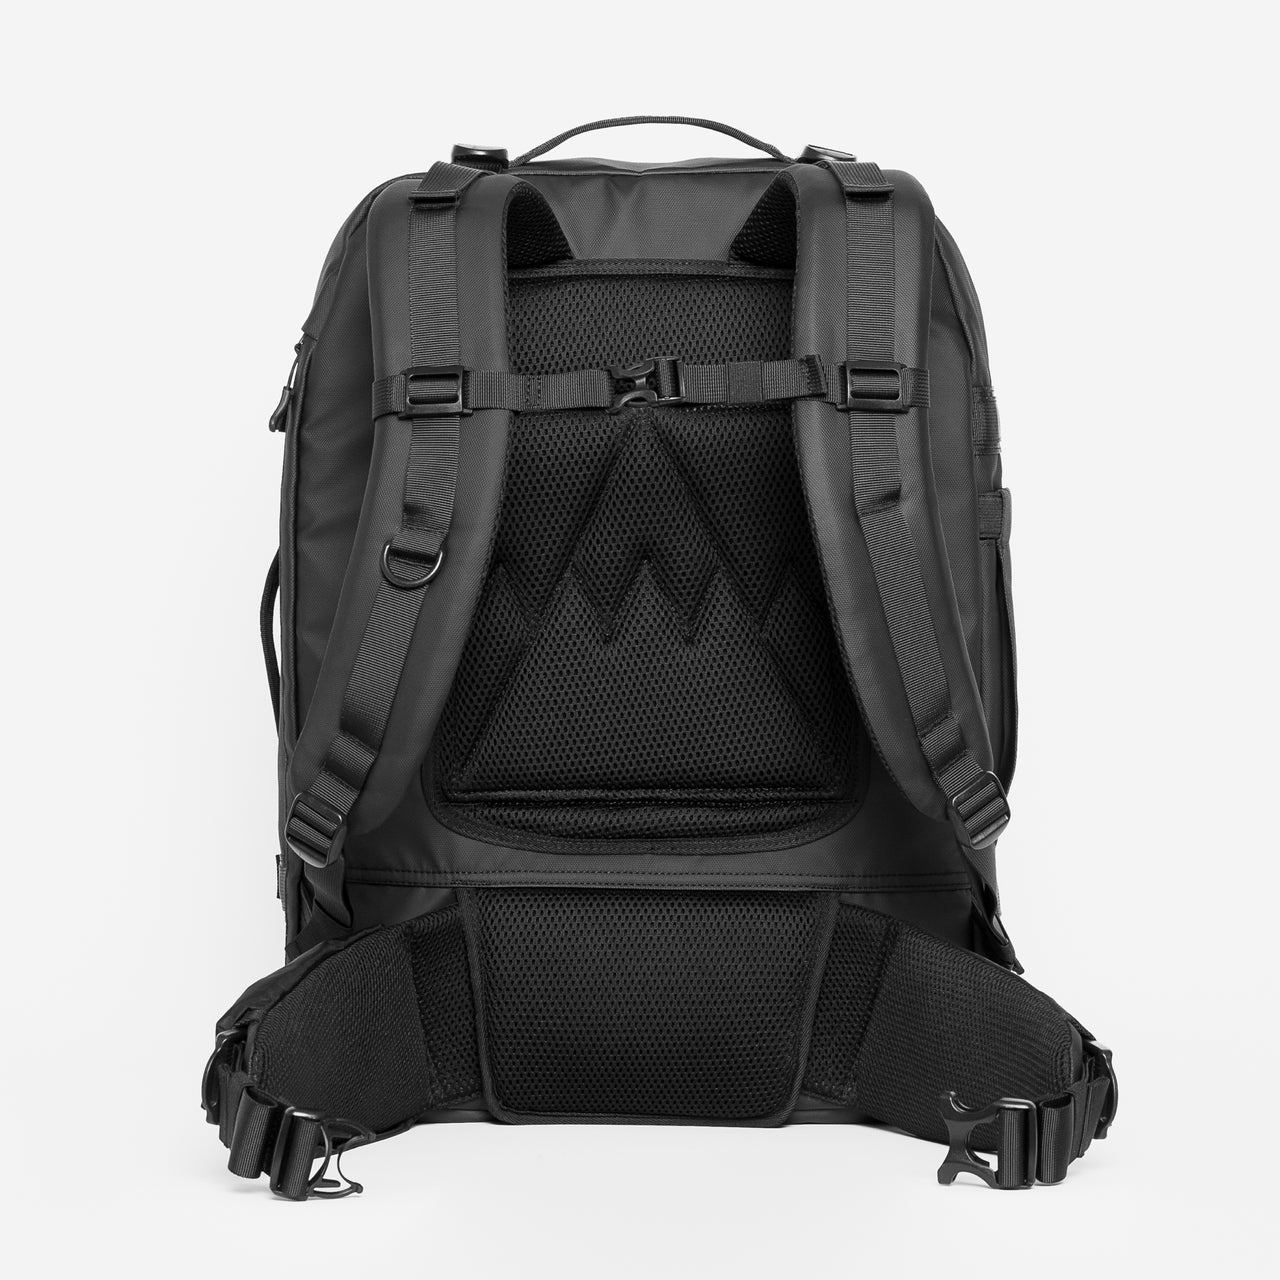 Adventure Bag in All Black back view